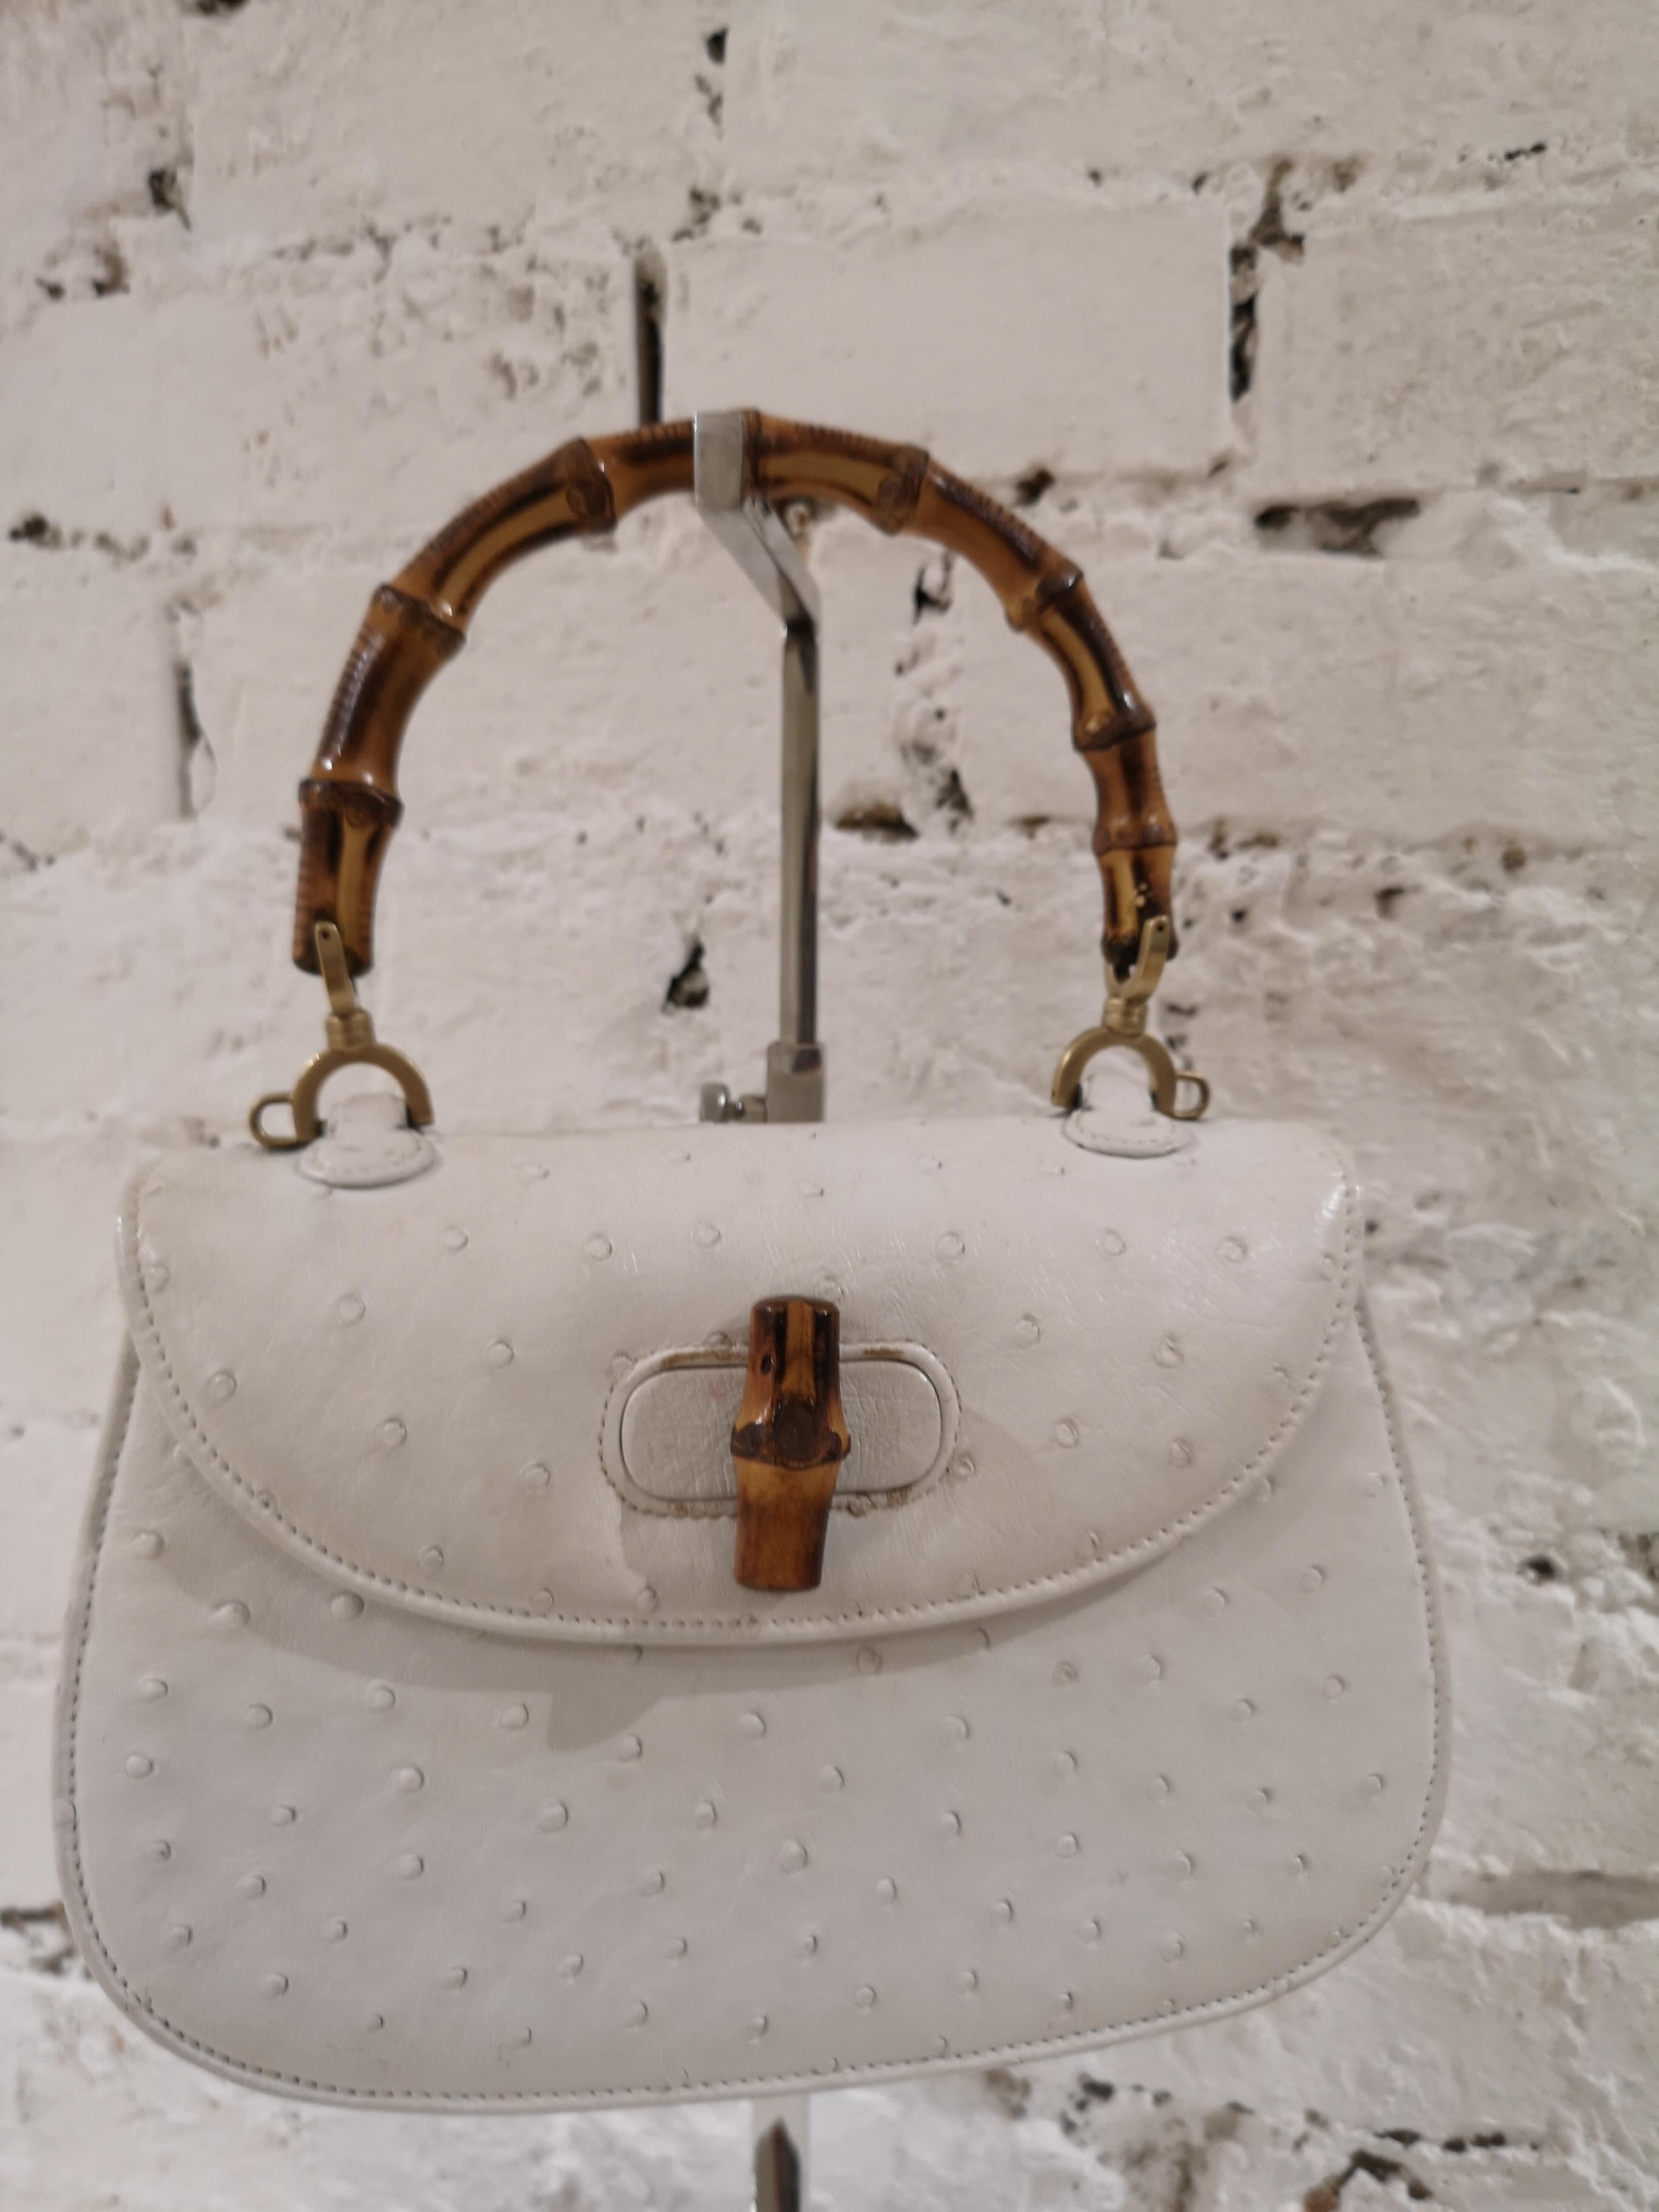 Gucci White Ostrich Leather Bamboo Bag
Crafted in Italy from luxurious white ostrich leather, this handbag features a brown bamboo structured top handle and a thin shoulder strap which can be removed.
The piece also features a foldover top with a